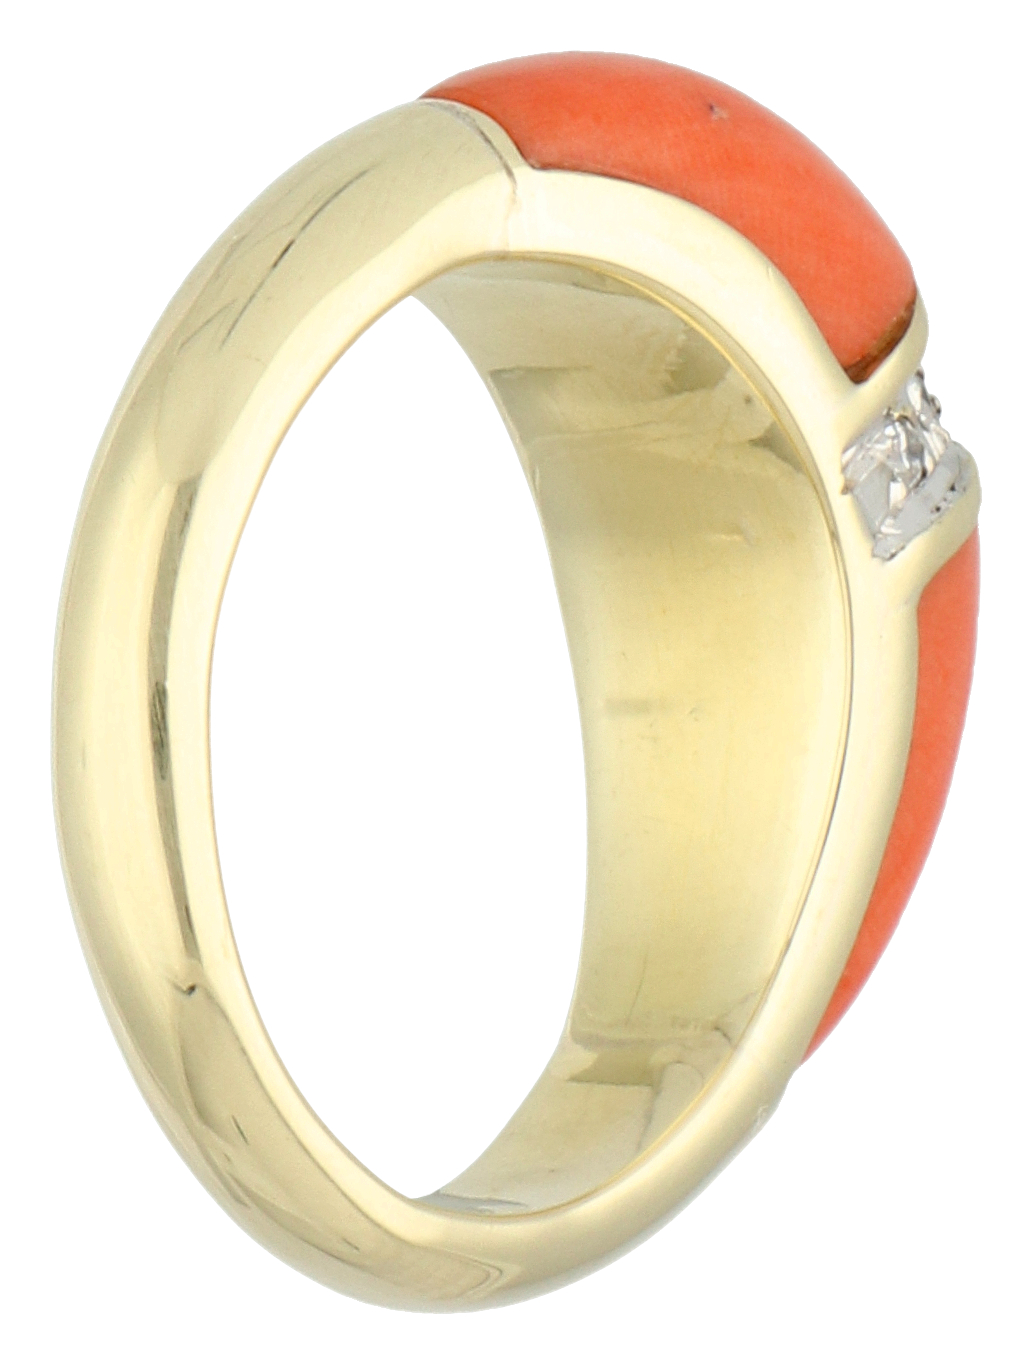 No Reserve - 14K yellow gold vintage ring set with red coral and diamonds. - Image 2 of 4